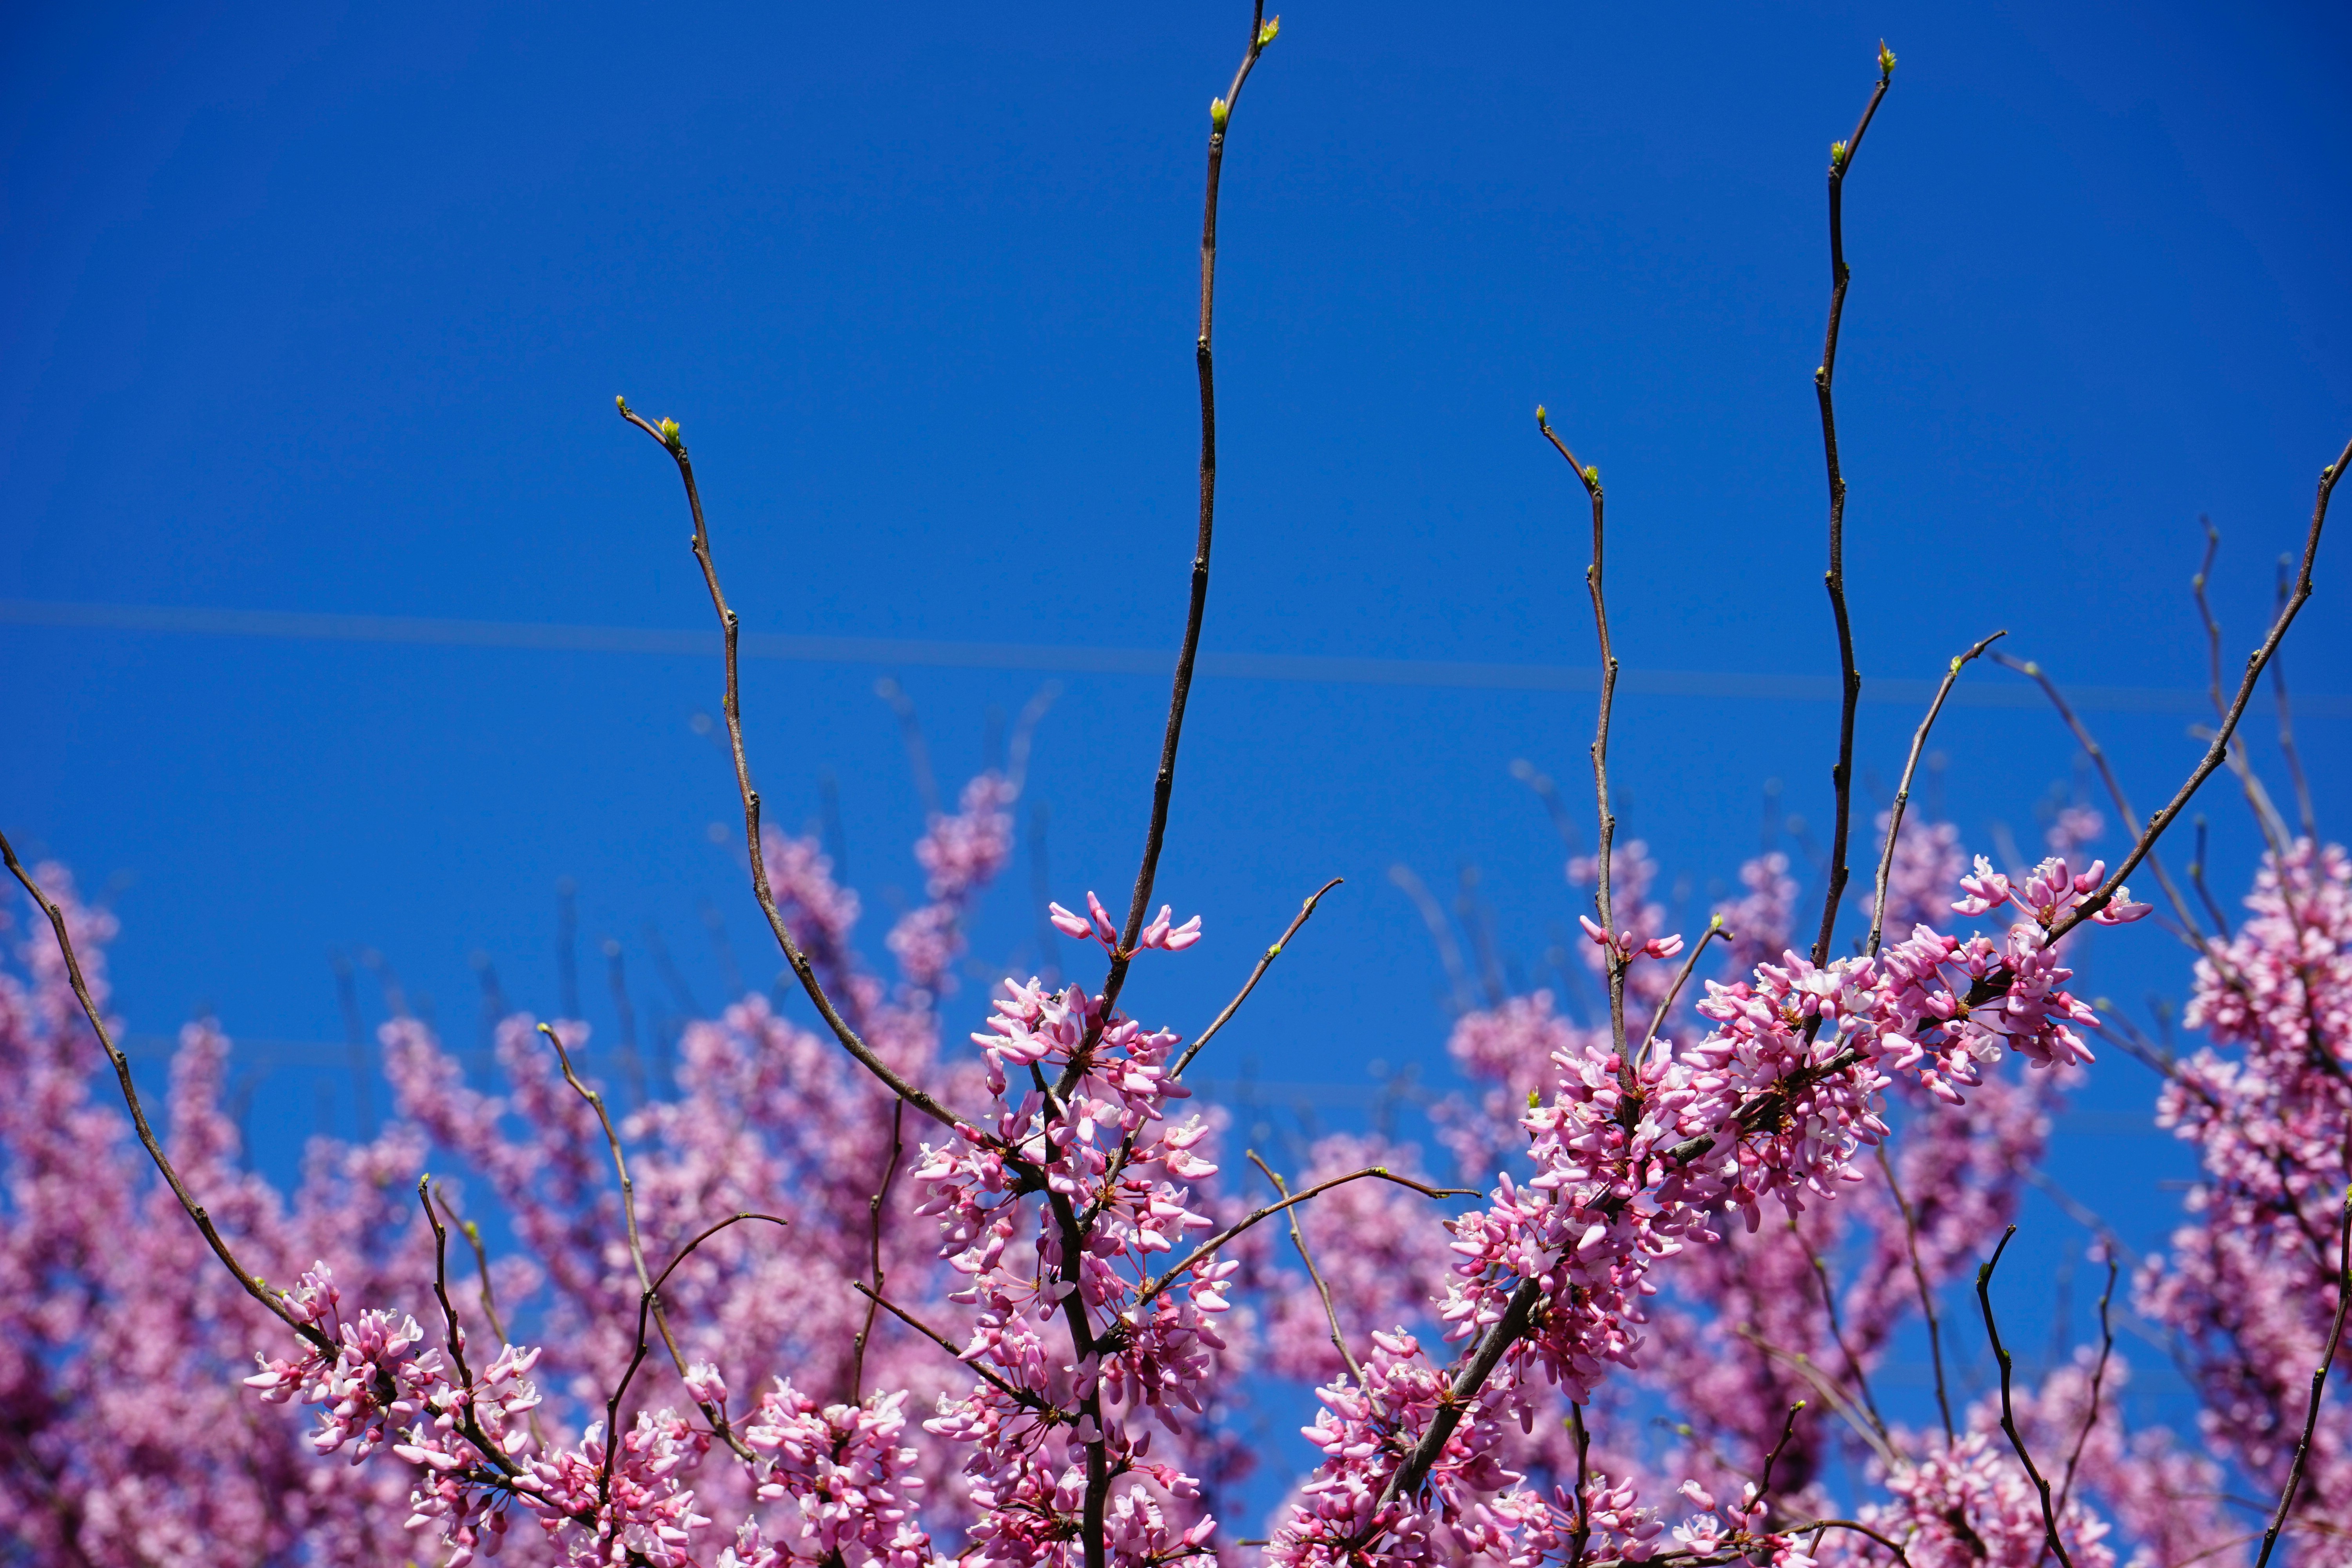 white and pink cherry blossom under blue sky during daytime